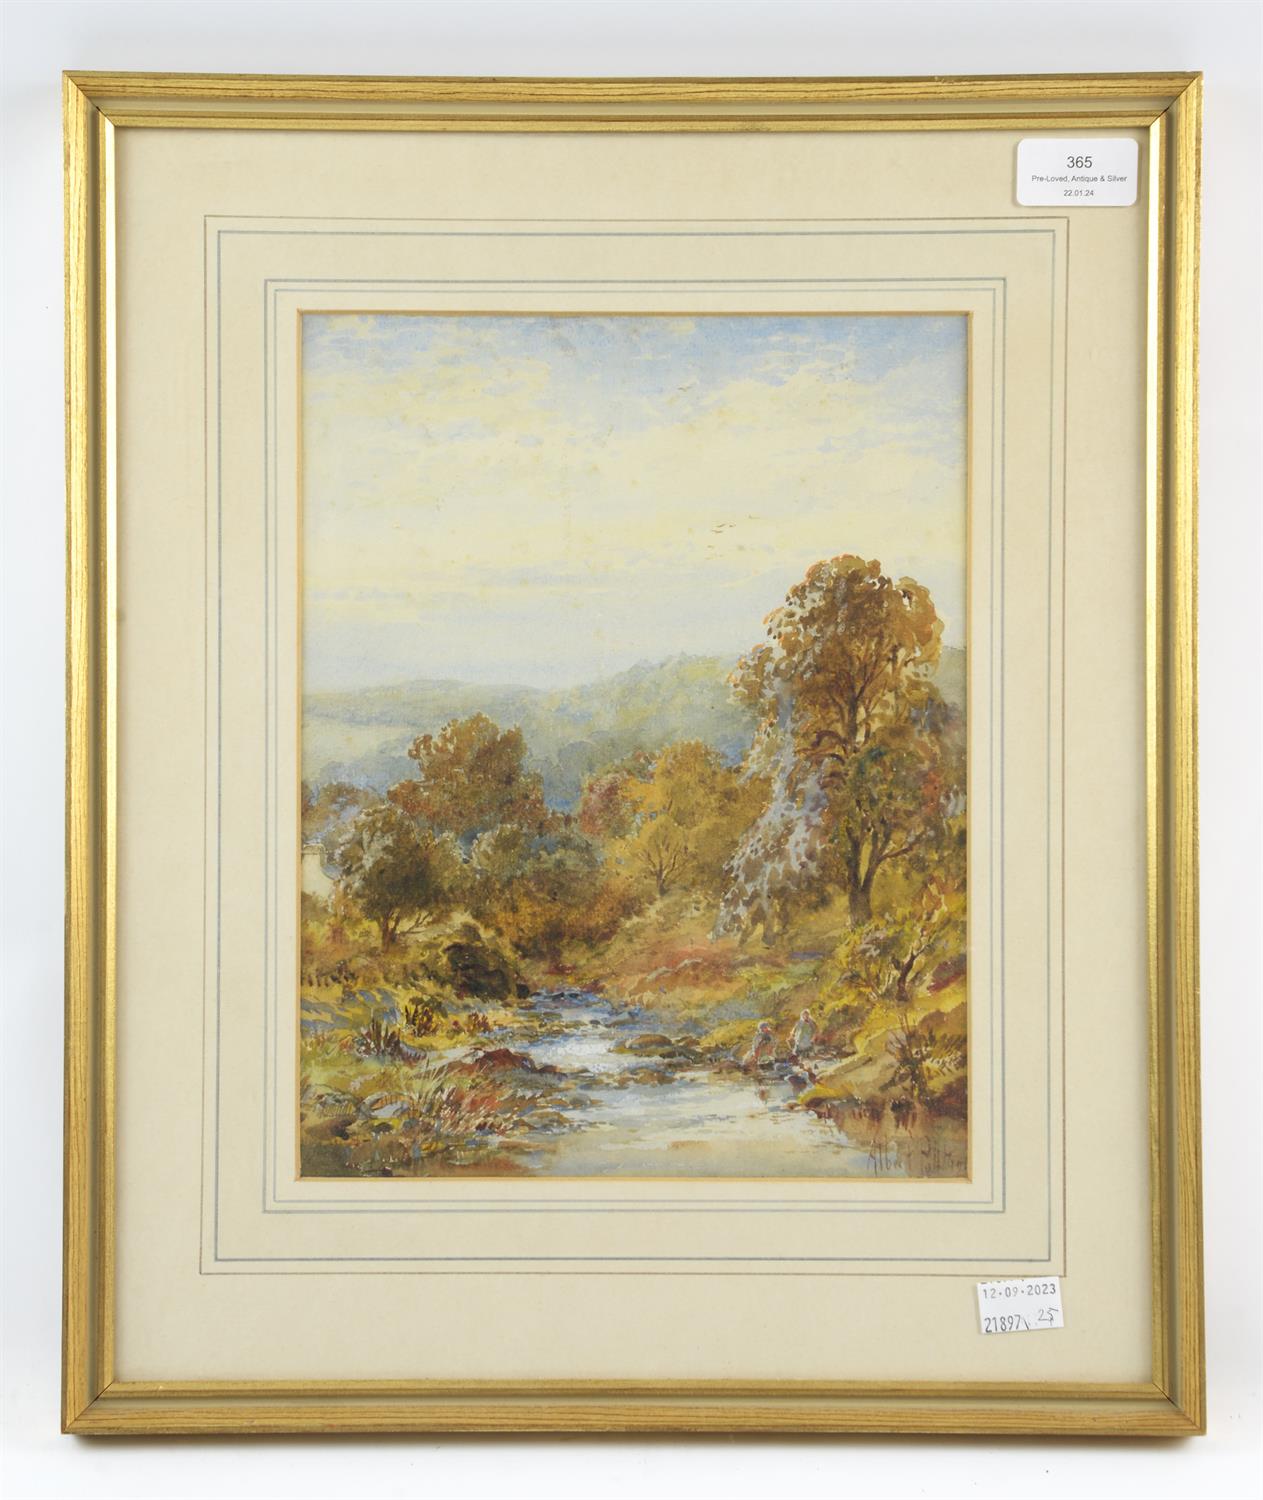 Albert Pollit (1856-1926), Wooded river scene, watercolour, signed lower right, 28 x 21.5cm.